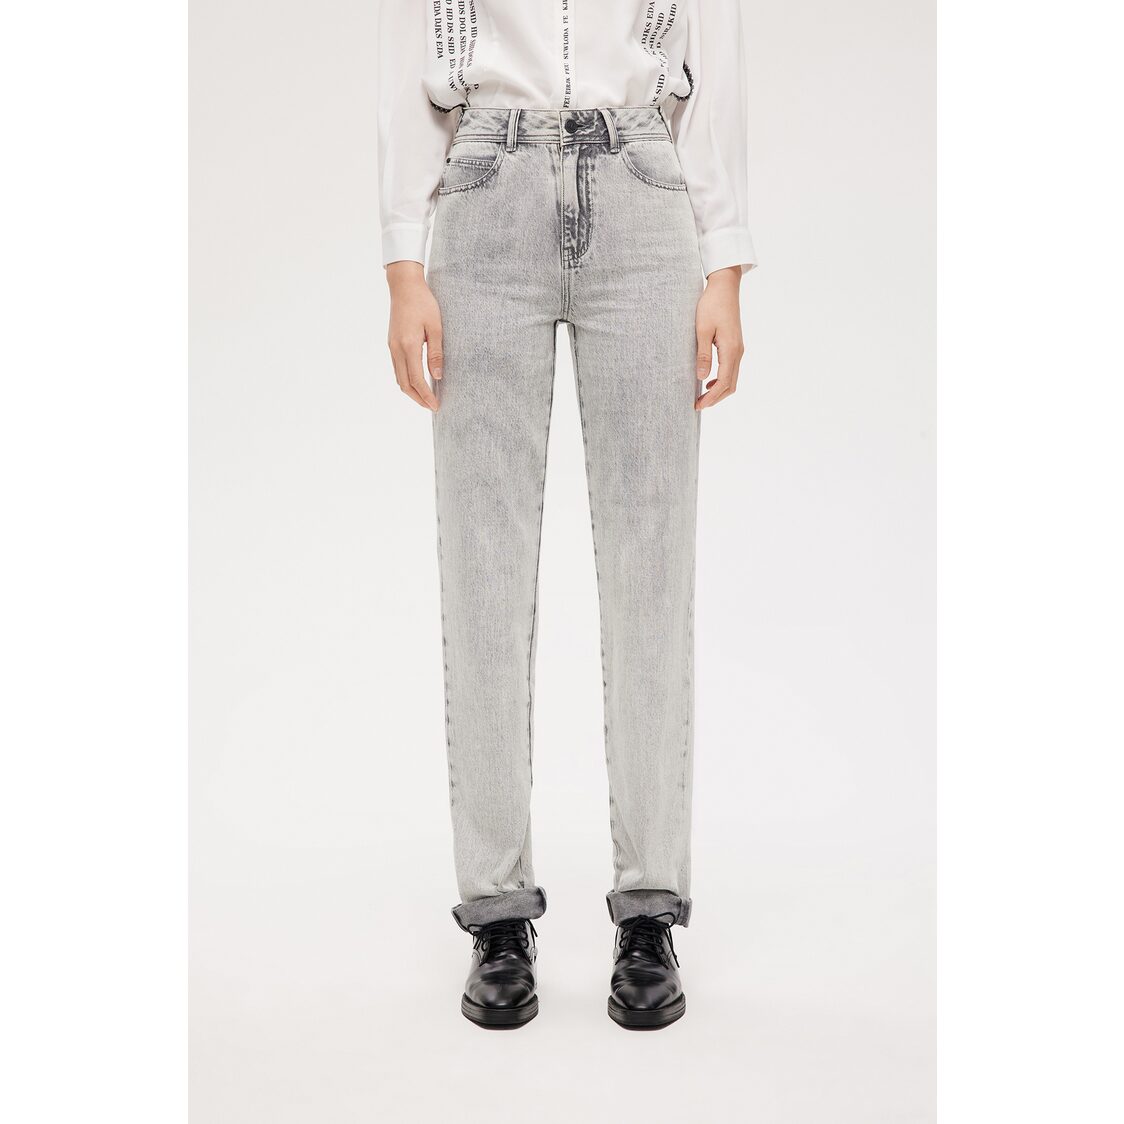 Lily Slim Fit Jeans Light Gray